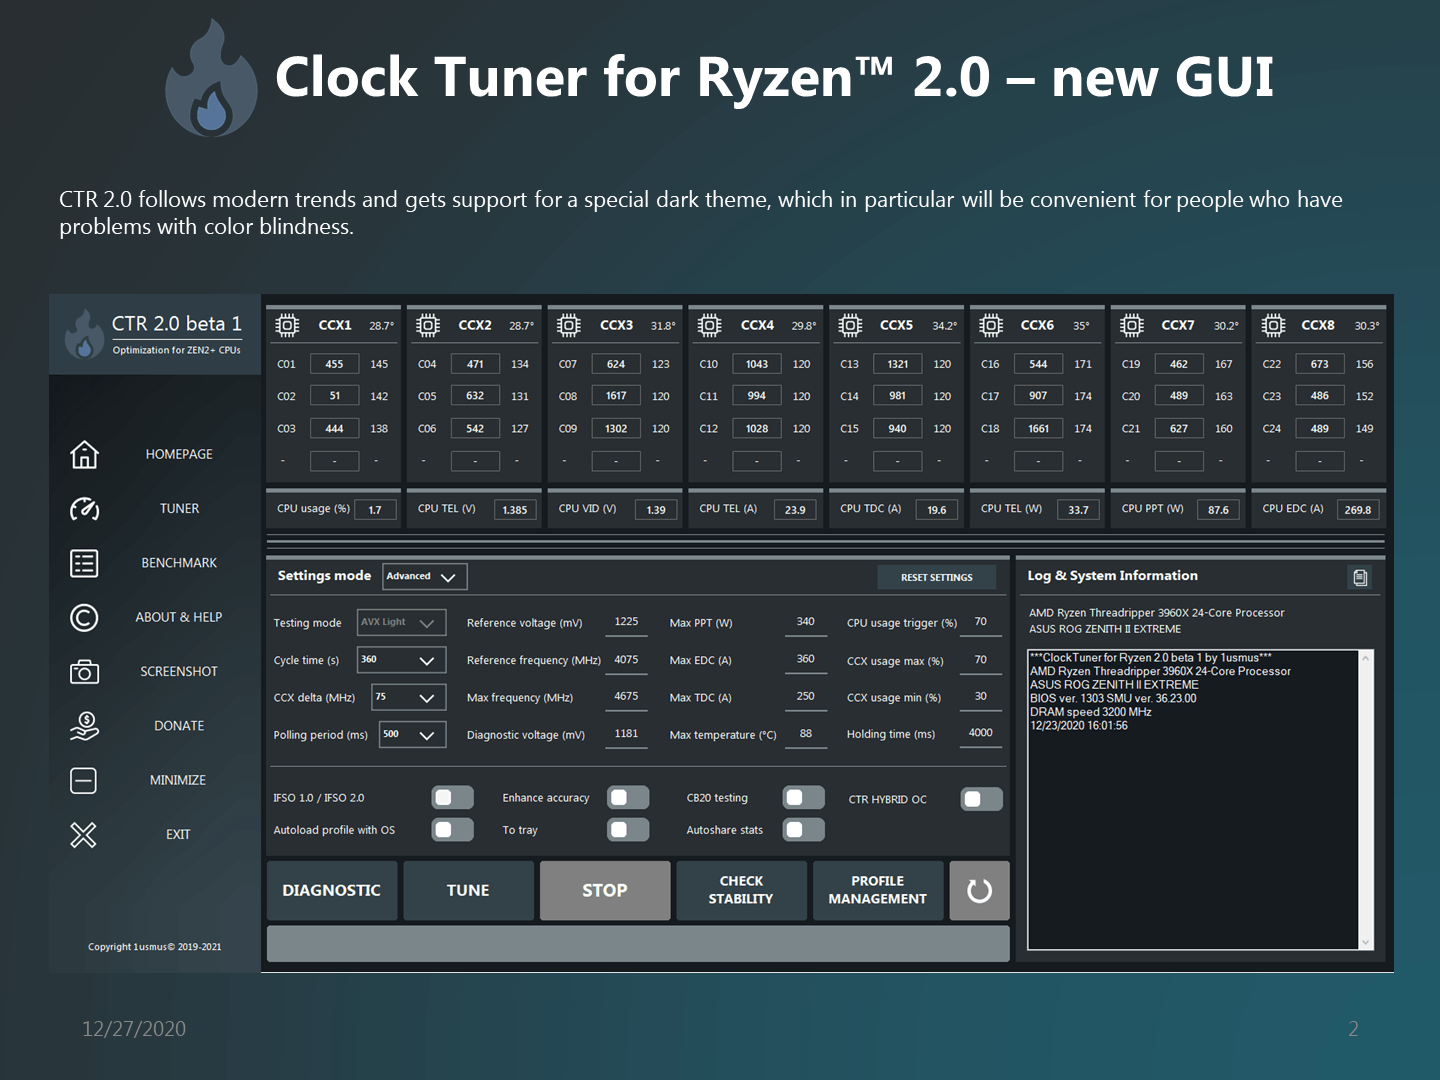 IgorsLab] Clock Tuner for Ryzen 2.0 Tutorial and Download – New version  with support for Ryzen 5000, Hybrid OC and Phoenix Mode : r/hardware